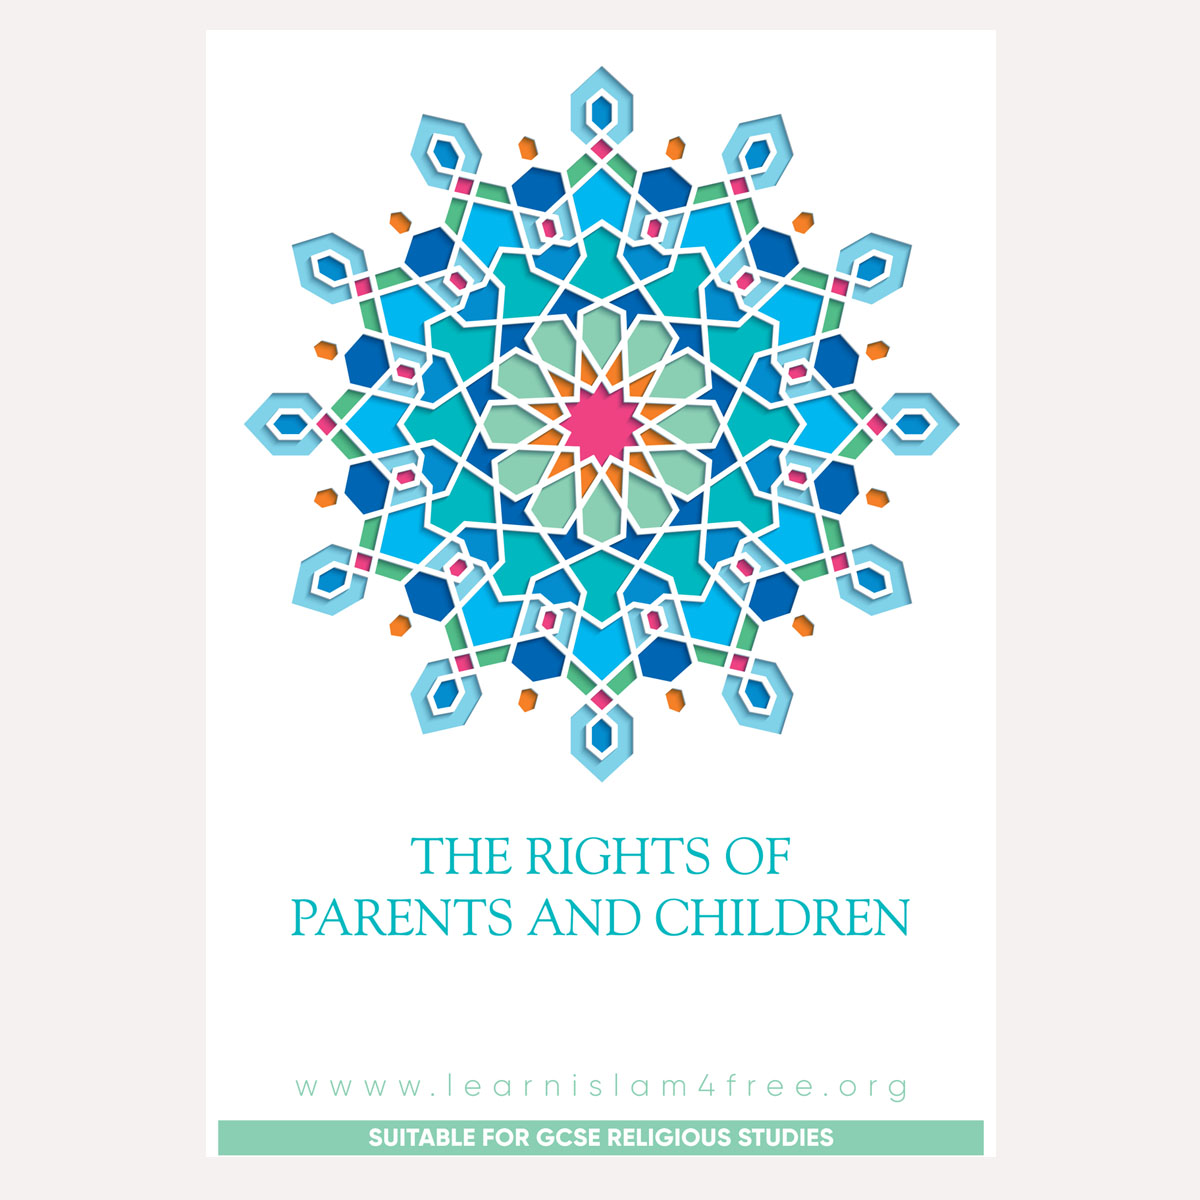 The Rights of Parents and children